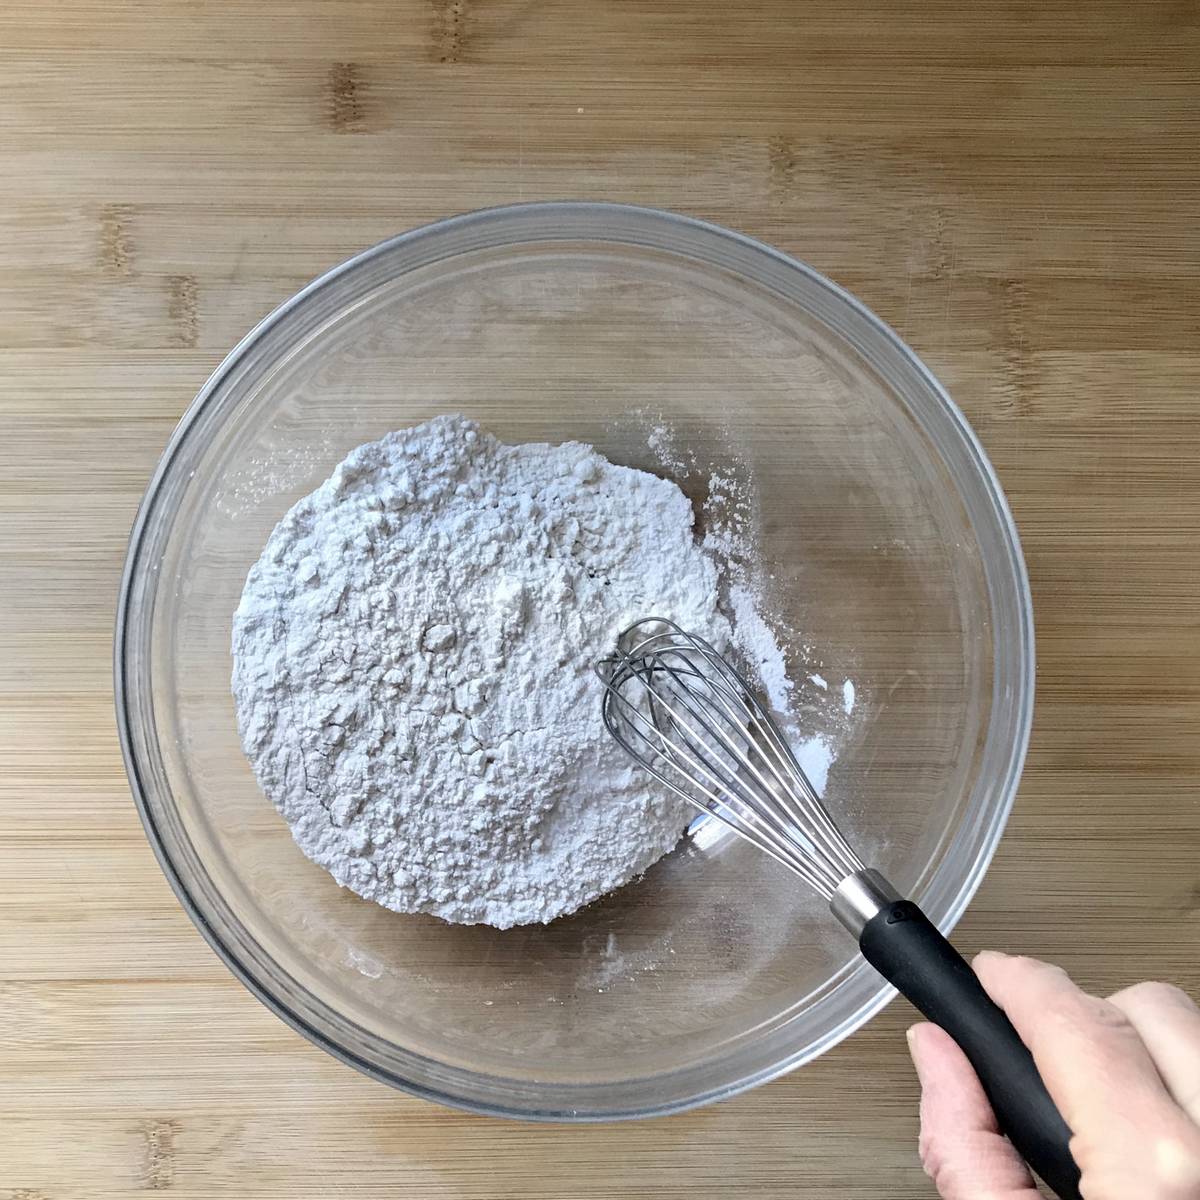 The dry ingredients to make pancakes are whisked together.